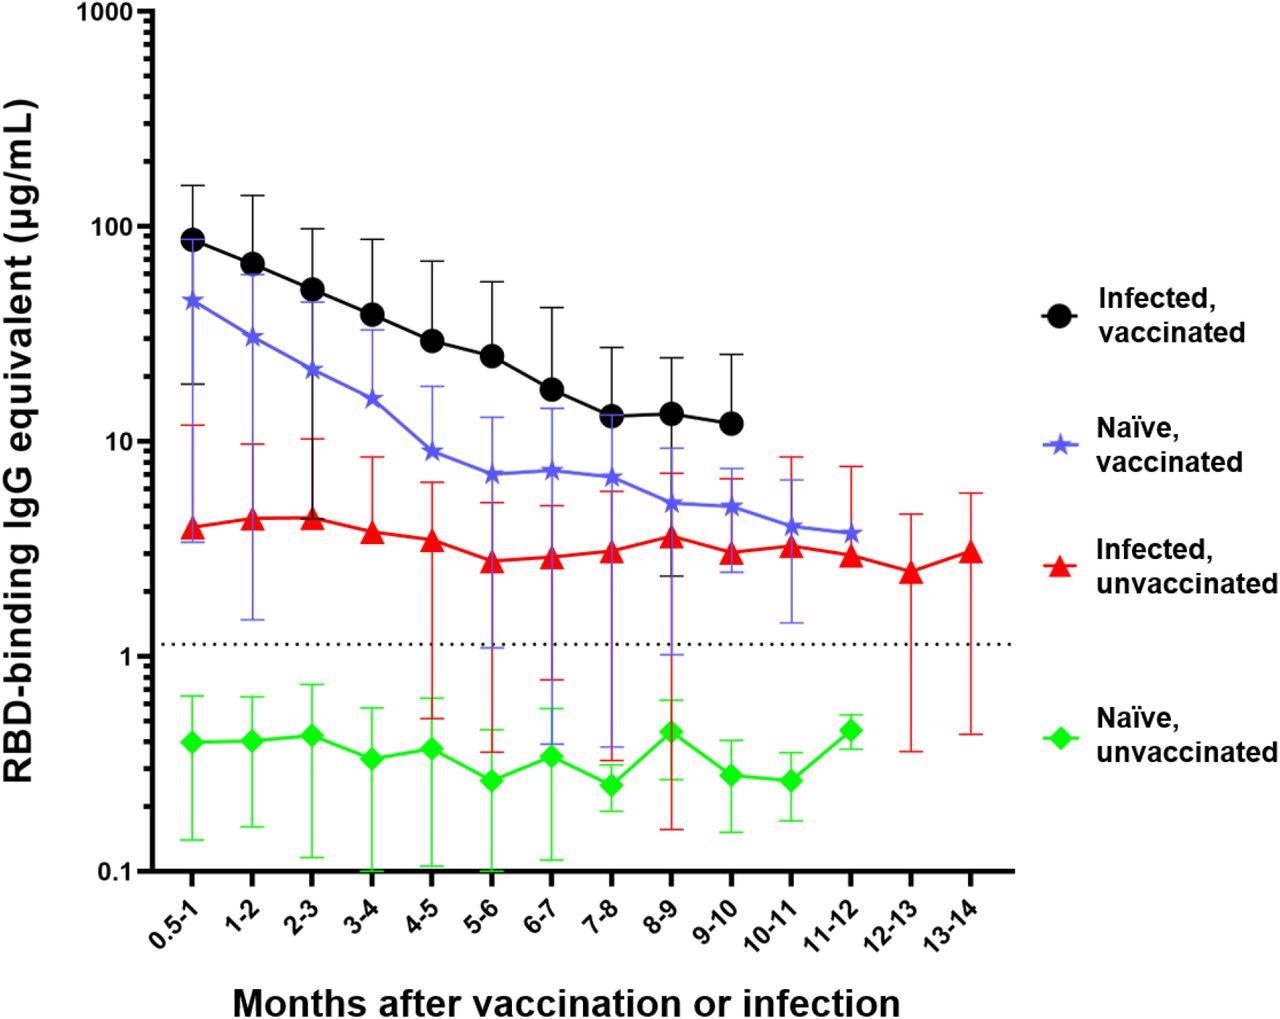 Differential waning of RBD-binding IgG antibody levels based on vaccination and infection status. Naïve unvaccinated (n=418) and infected unvaccinated (n=306) show no change in antibody levels over time (p>0.05); naïve, vaccinated participants (n=515) and infected, vaccinated participants (n=303) both show significant waning over the time (****p<0.0001). The antibody level of the naïve unvaccinated group was always lower than the other groups (****p<0.0001); the infected vaccinated group was always higher than any other group (*p<0.05); naïve, vaccinated group is higher than infected, unvaccinated group for the first 4 months after vaccination (**p<0.0014). The rate of decay was only significantly different between the vaccinated and infected groups (****p<0.0001) but not between the two vaccinated (p=0.7762) and the two unvaccinated groups (p=0.9476). Number of months start with the time of reception of the primary vaccines series for the vaccinated groups, time of infection for the infected unvaccinated group, and the first available timepoint for the naïve unvaccinated group.